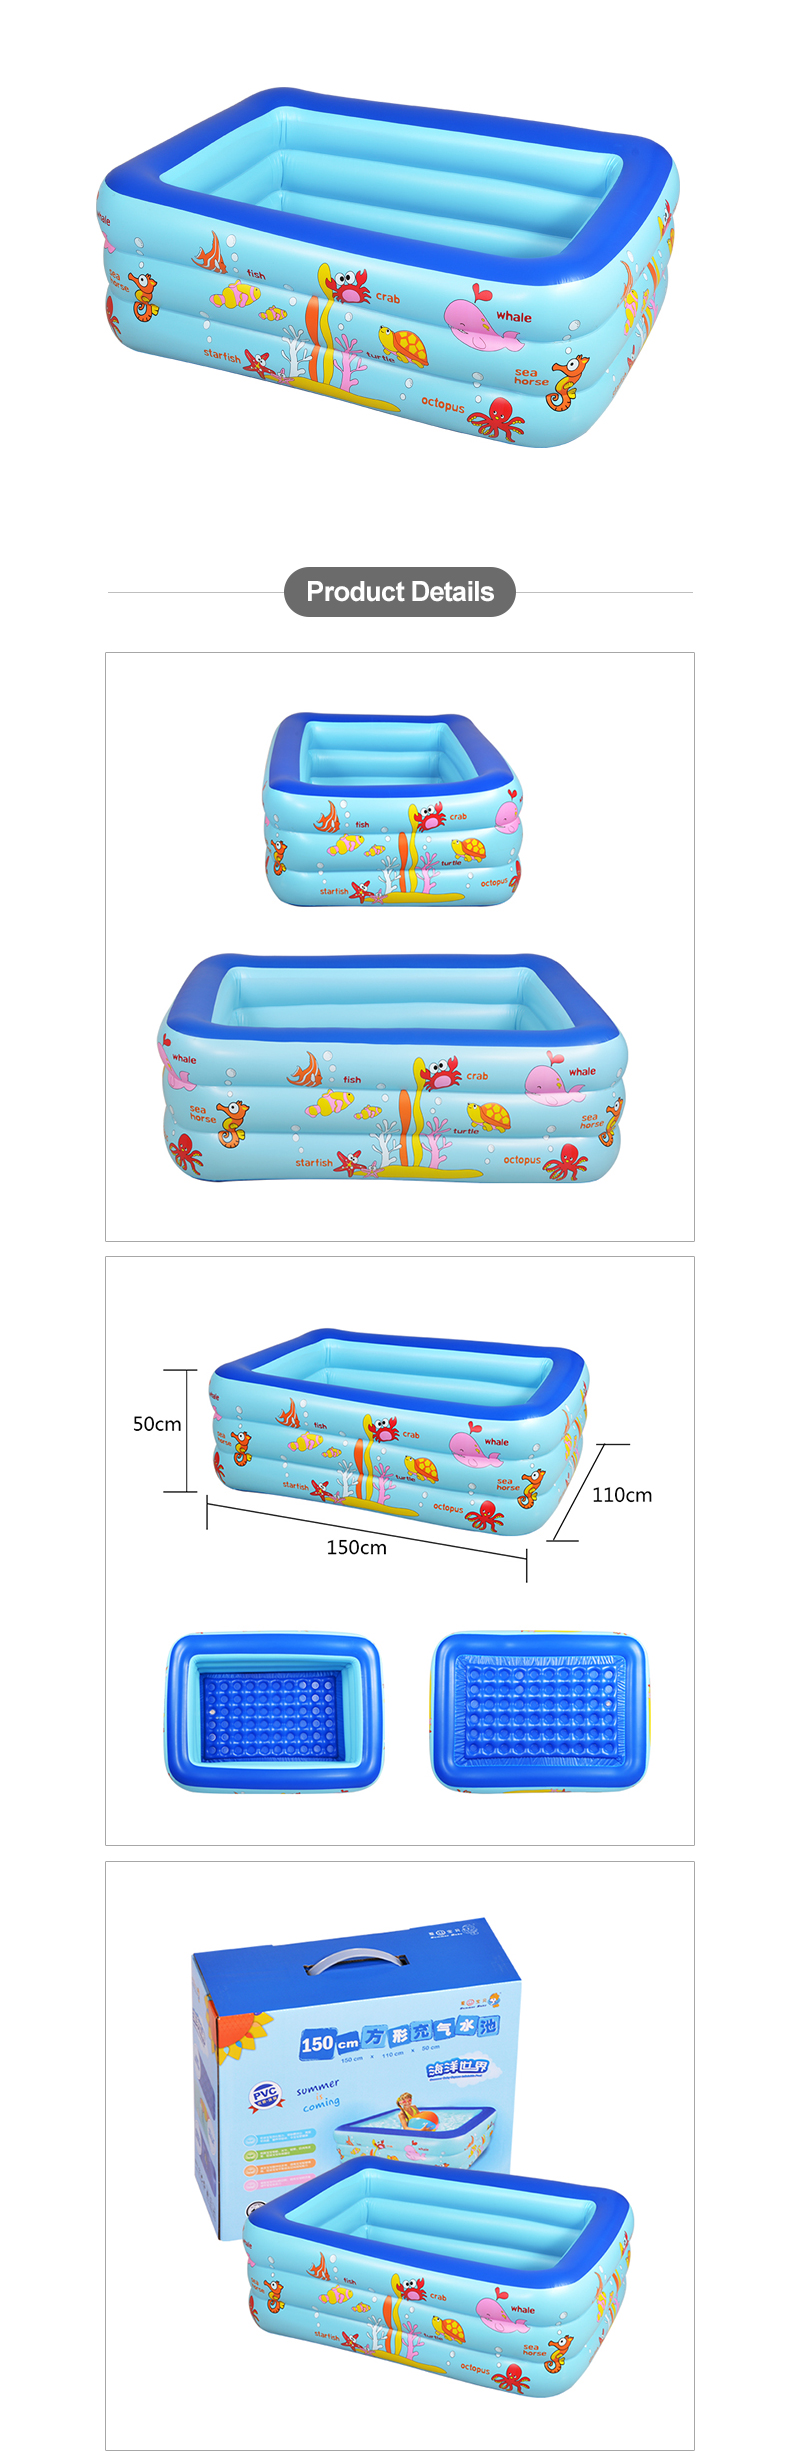 High Quality Outdoor Inflatable Pool For Family 4